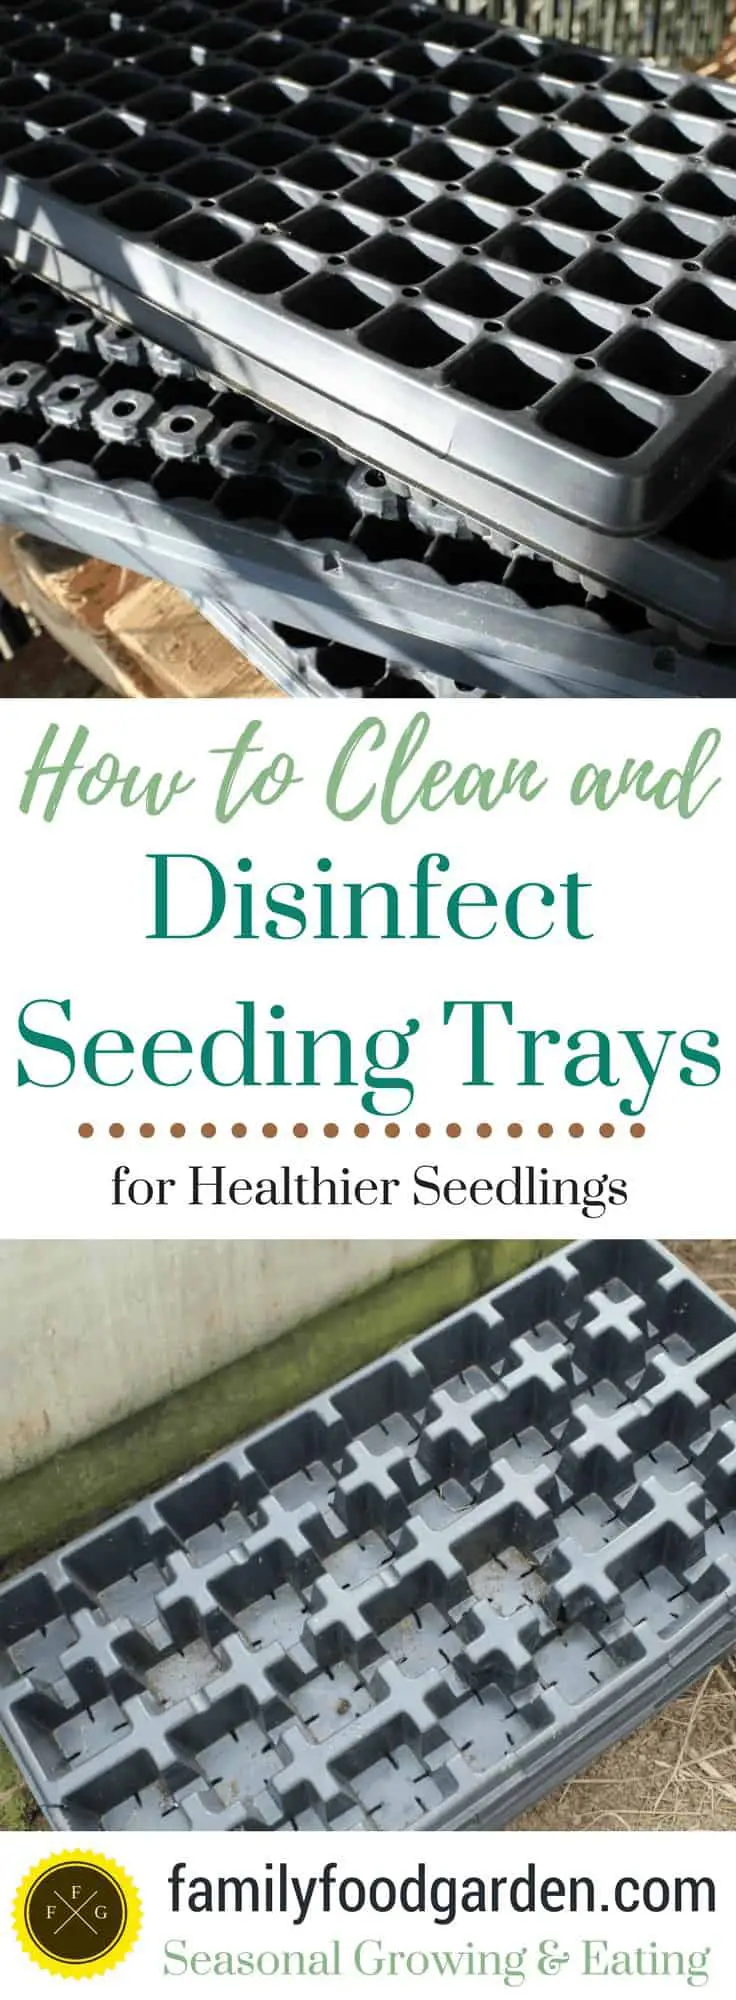 How to clean and disinfect seeding trays for healthier seedlings